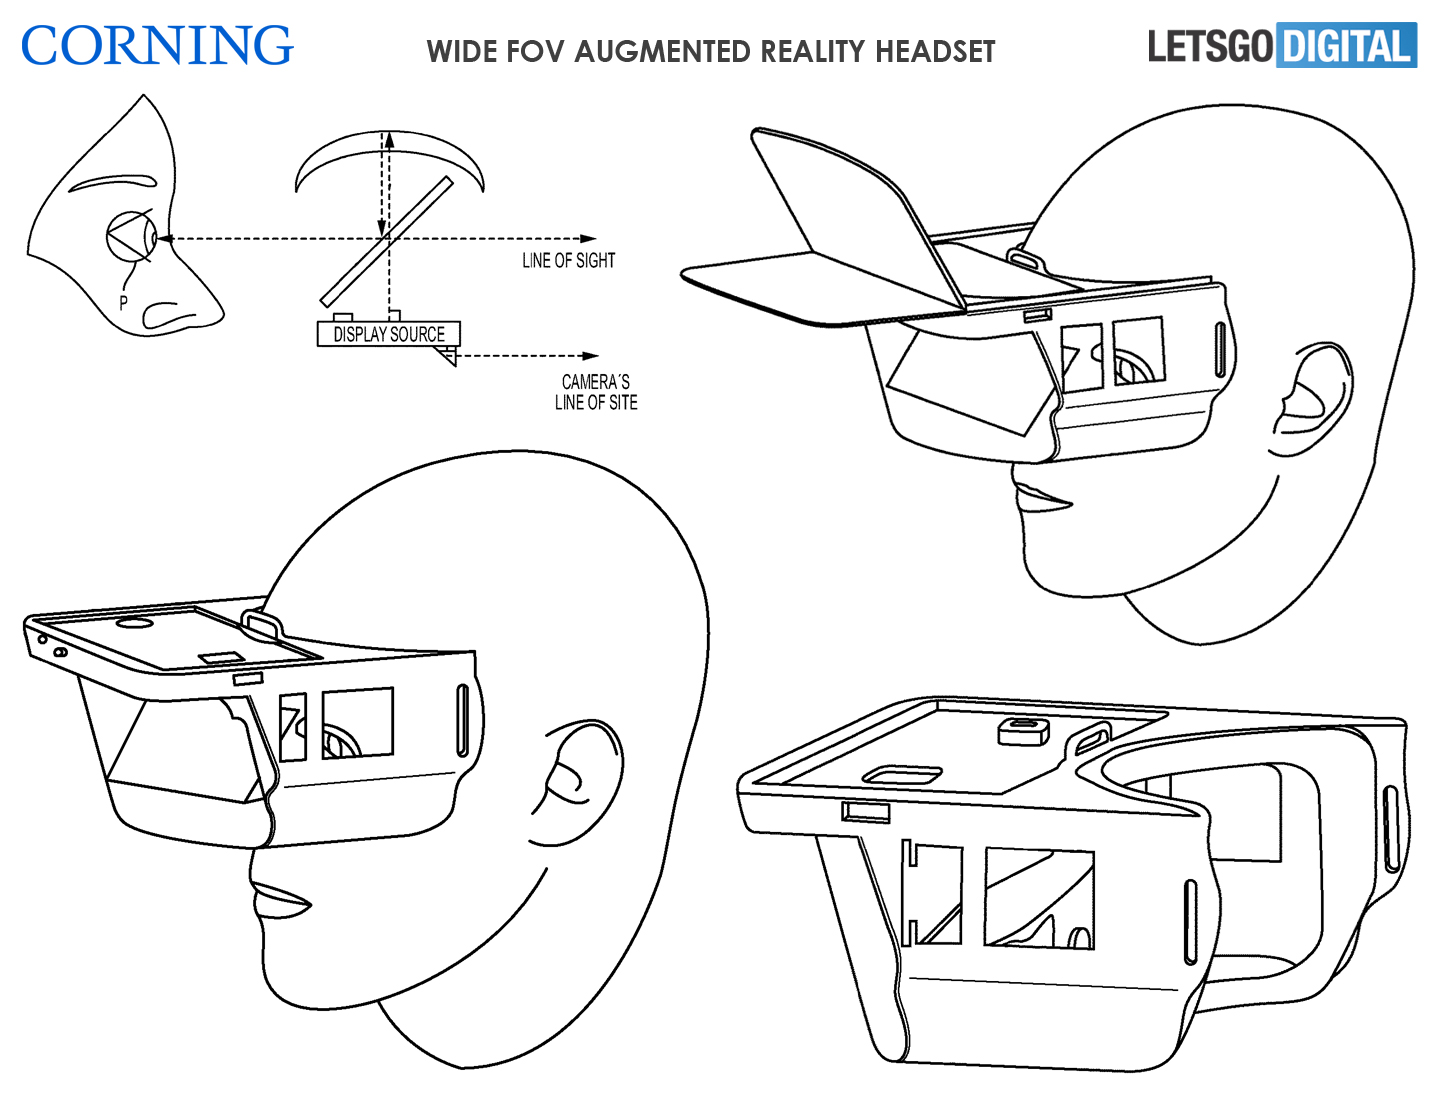 Augmented Reality headset